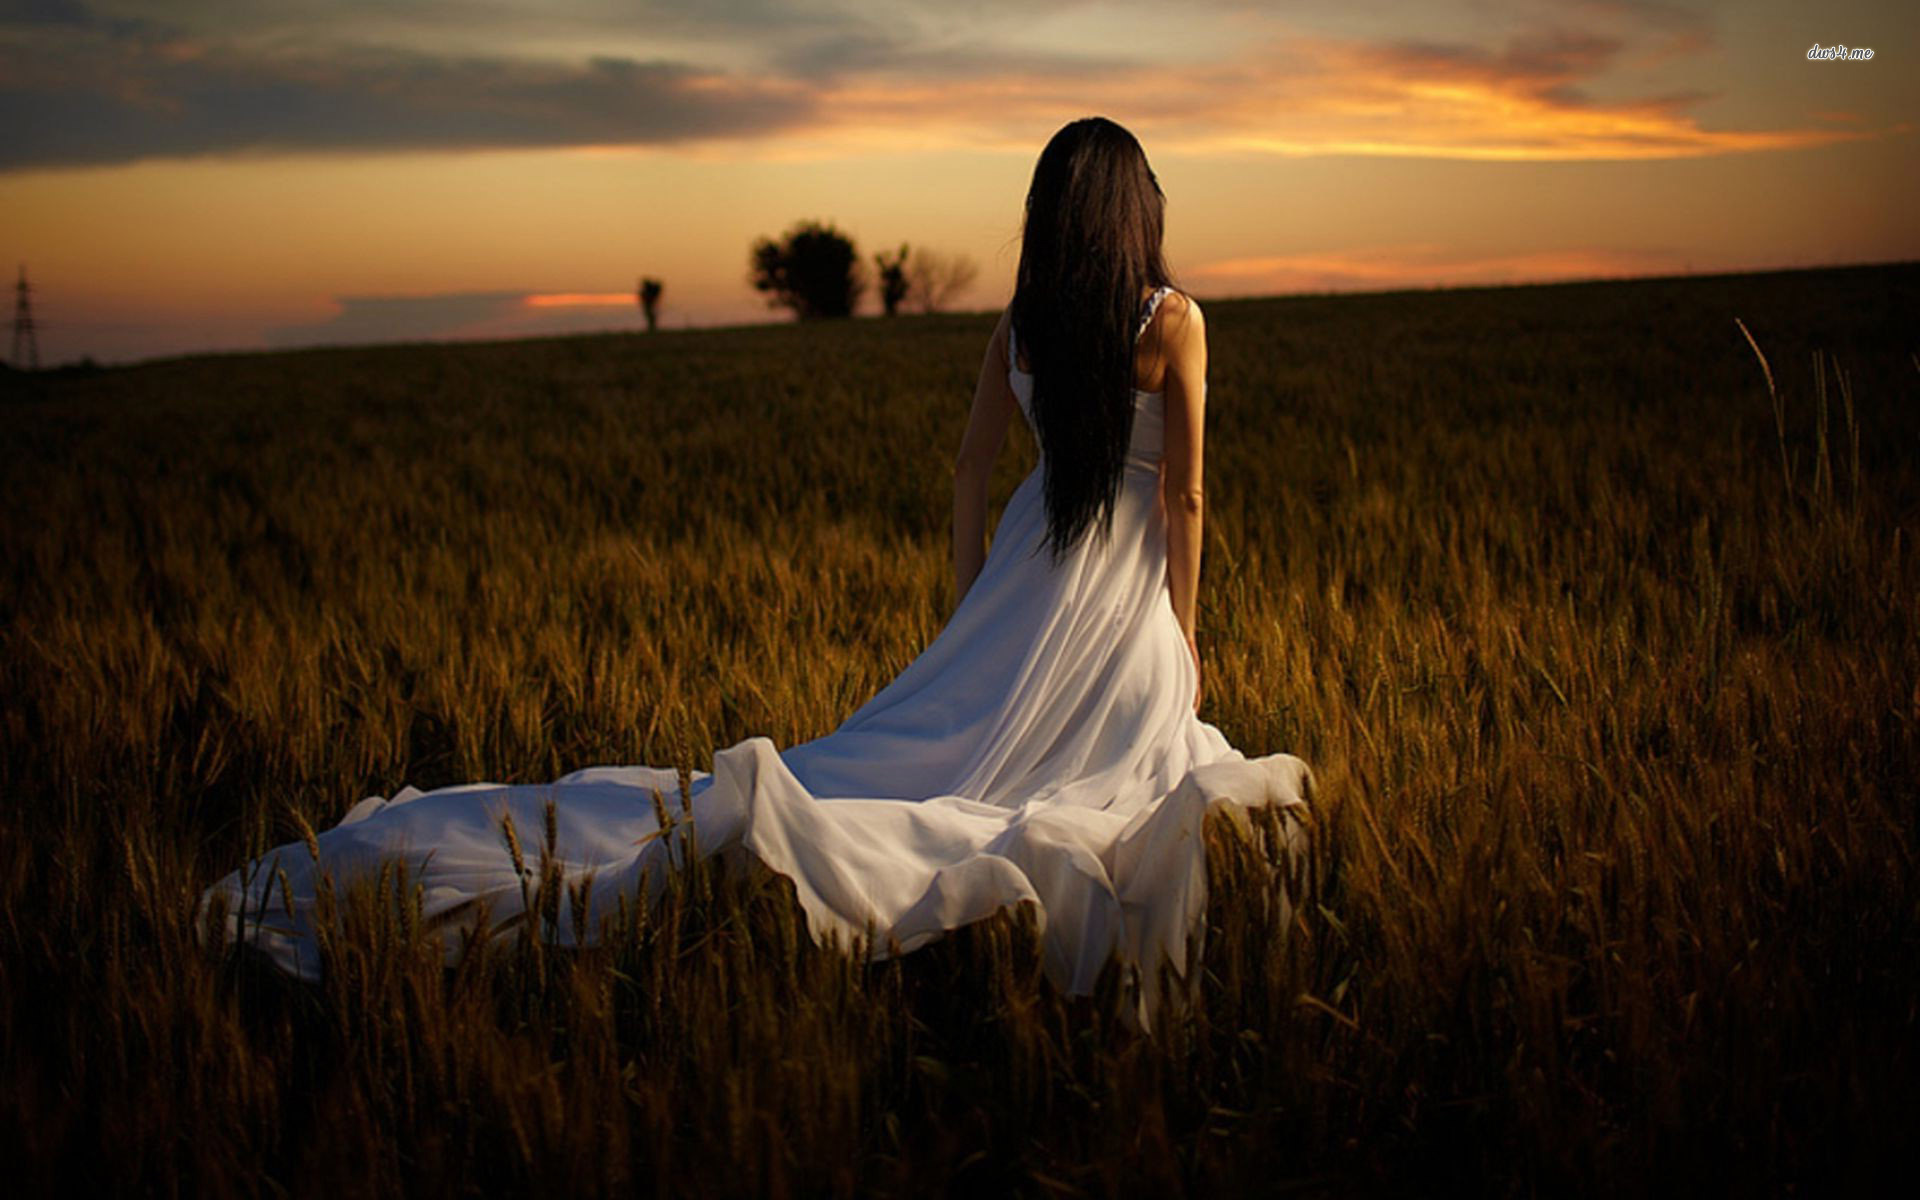 Dress In The Barley Field Wallpaper Photography